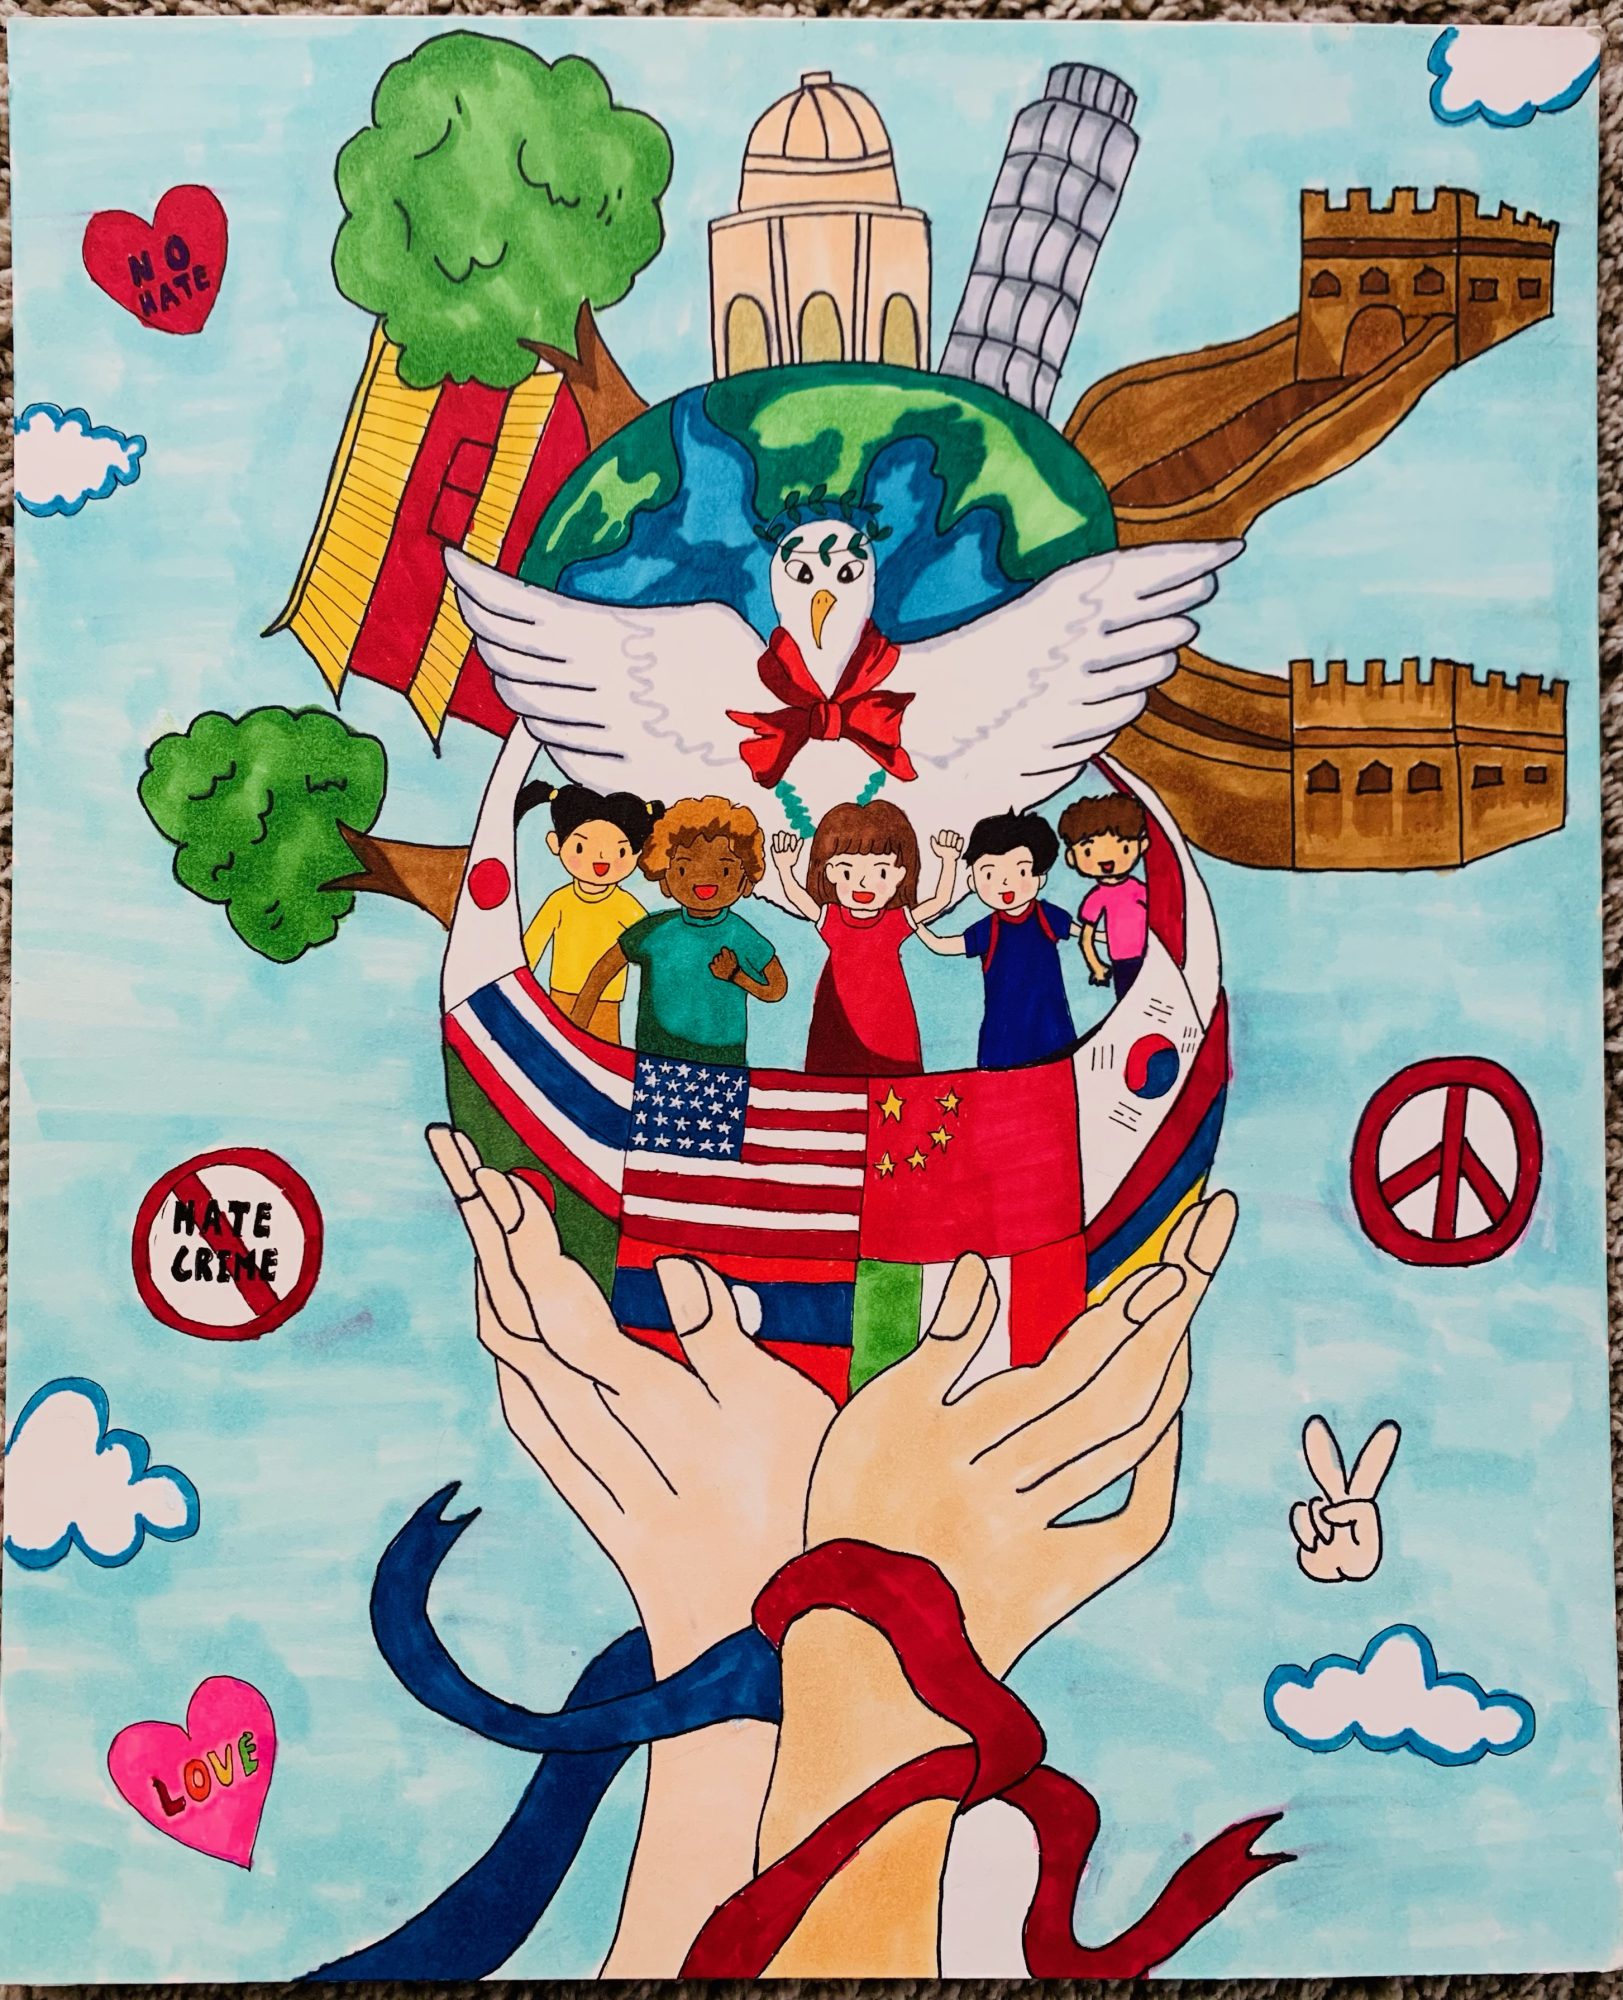 Youth Art Contest: Peace, Love, Unity